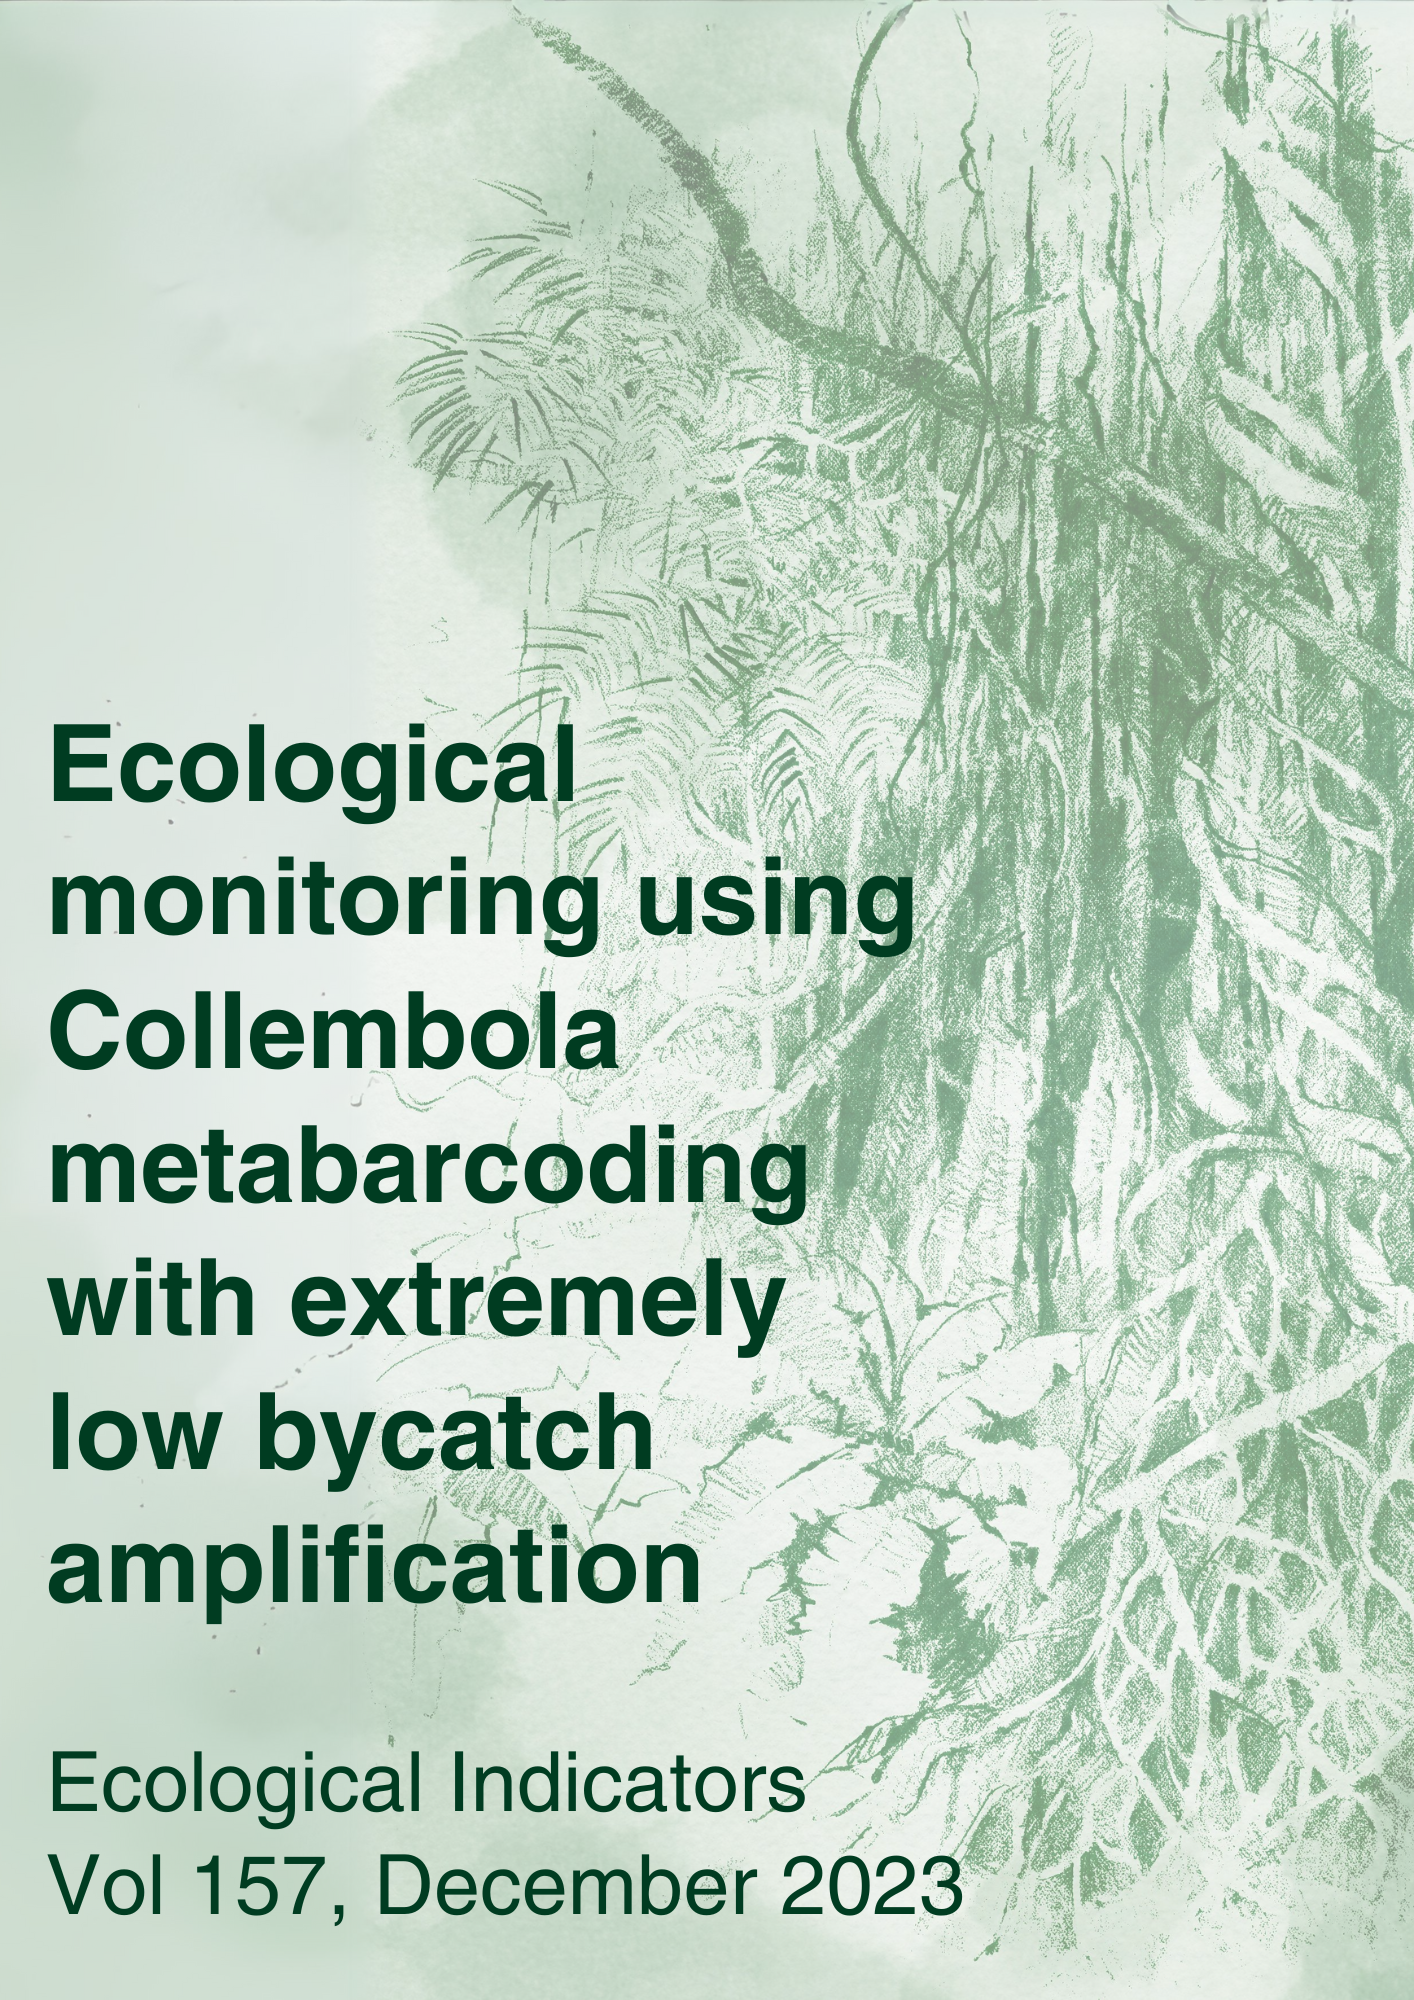 Ecological monitoring using Collembola metabarcoding with extremely low bycatch amplification